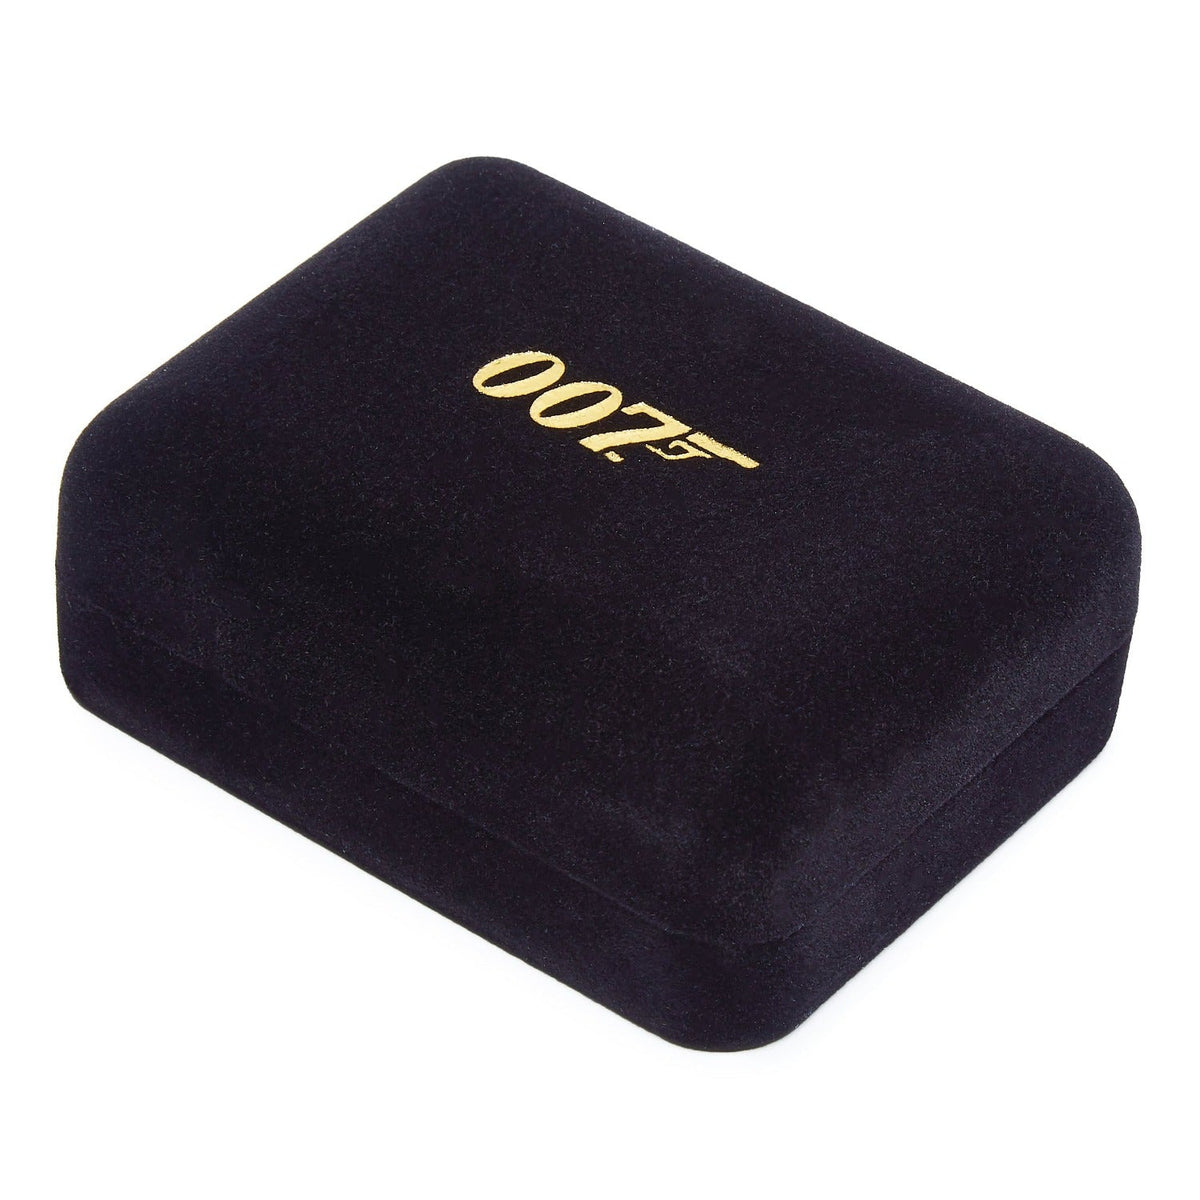 Dove Cufflinks - For Your Eyes Only Limited Edition - 007STORE